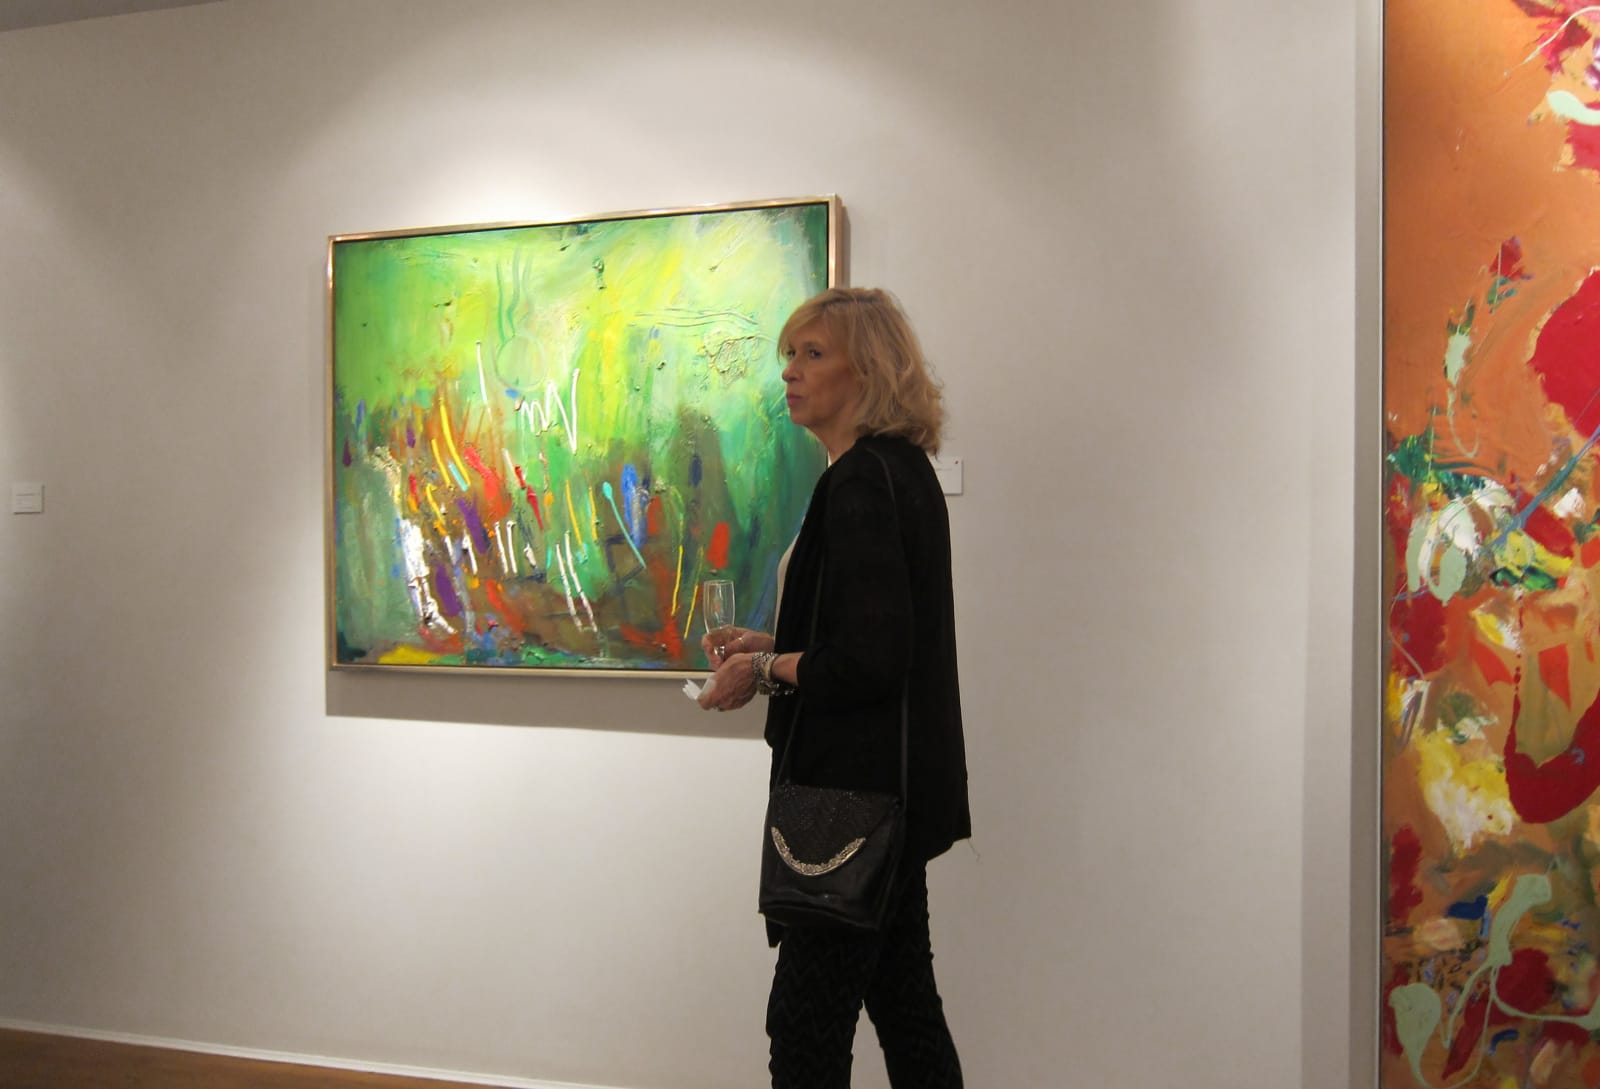 Opening reception: Why Nature? Hofmann, Mitchell, Pousette-Dart, Stamos